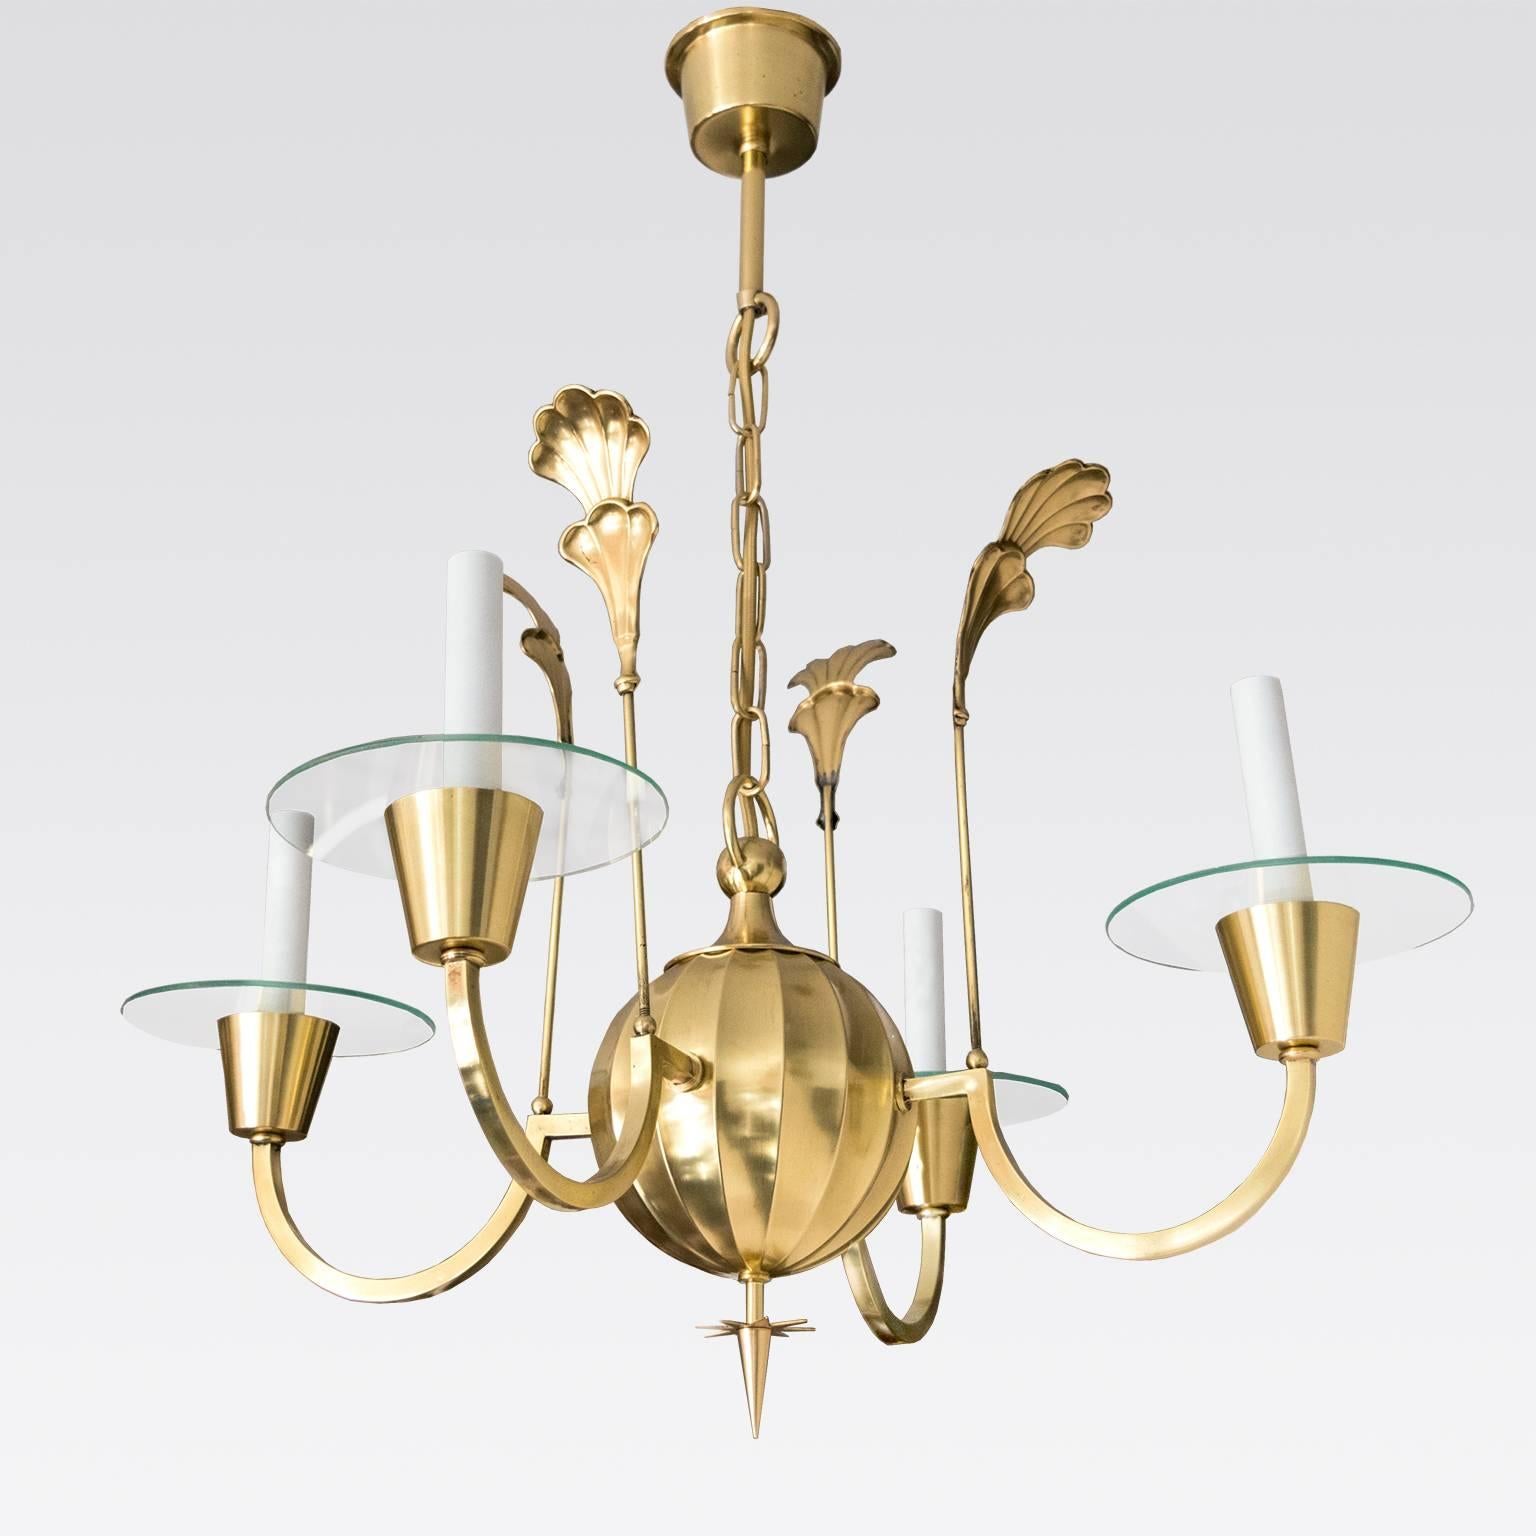 An elegant Swedish Art Deco, Scandinavian Modern polished four-arm brass chandelier designed by Elis Bergh for C.G. Hallberg silversmith, Stockholm. Newly restored and electrified with candelabra base bulbs, each arm has a clear glass bobeche. Made